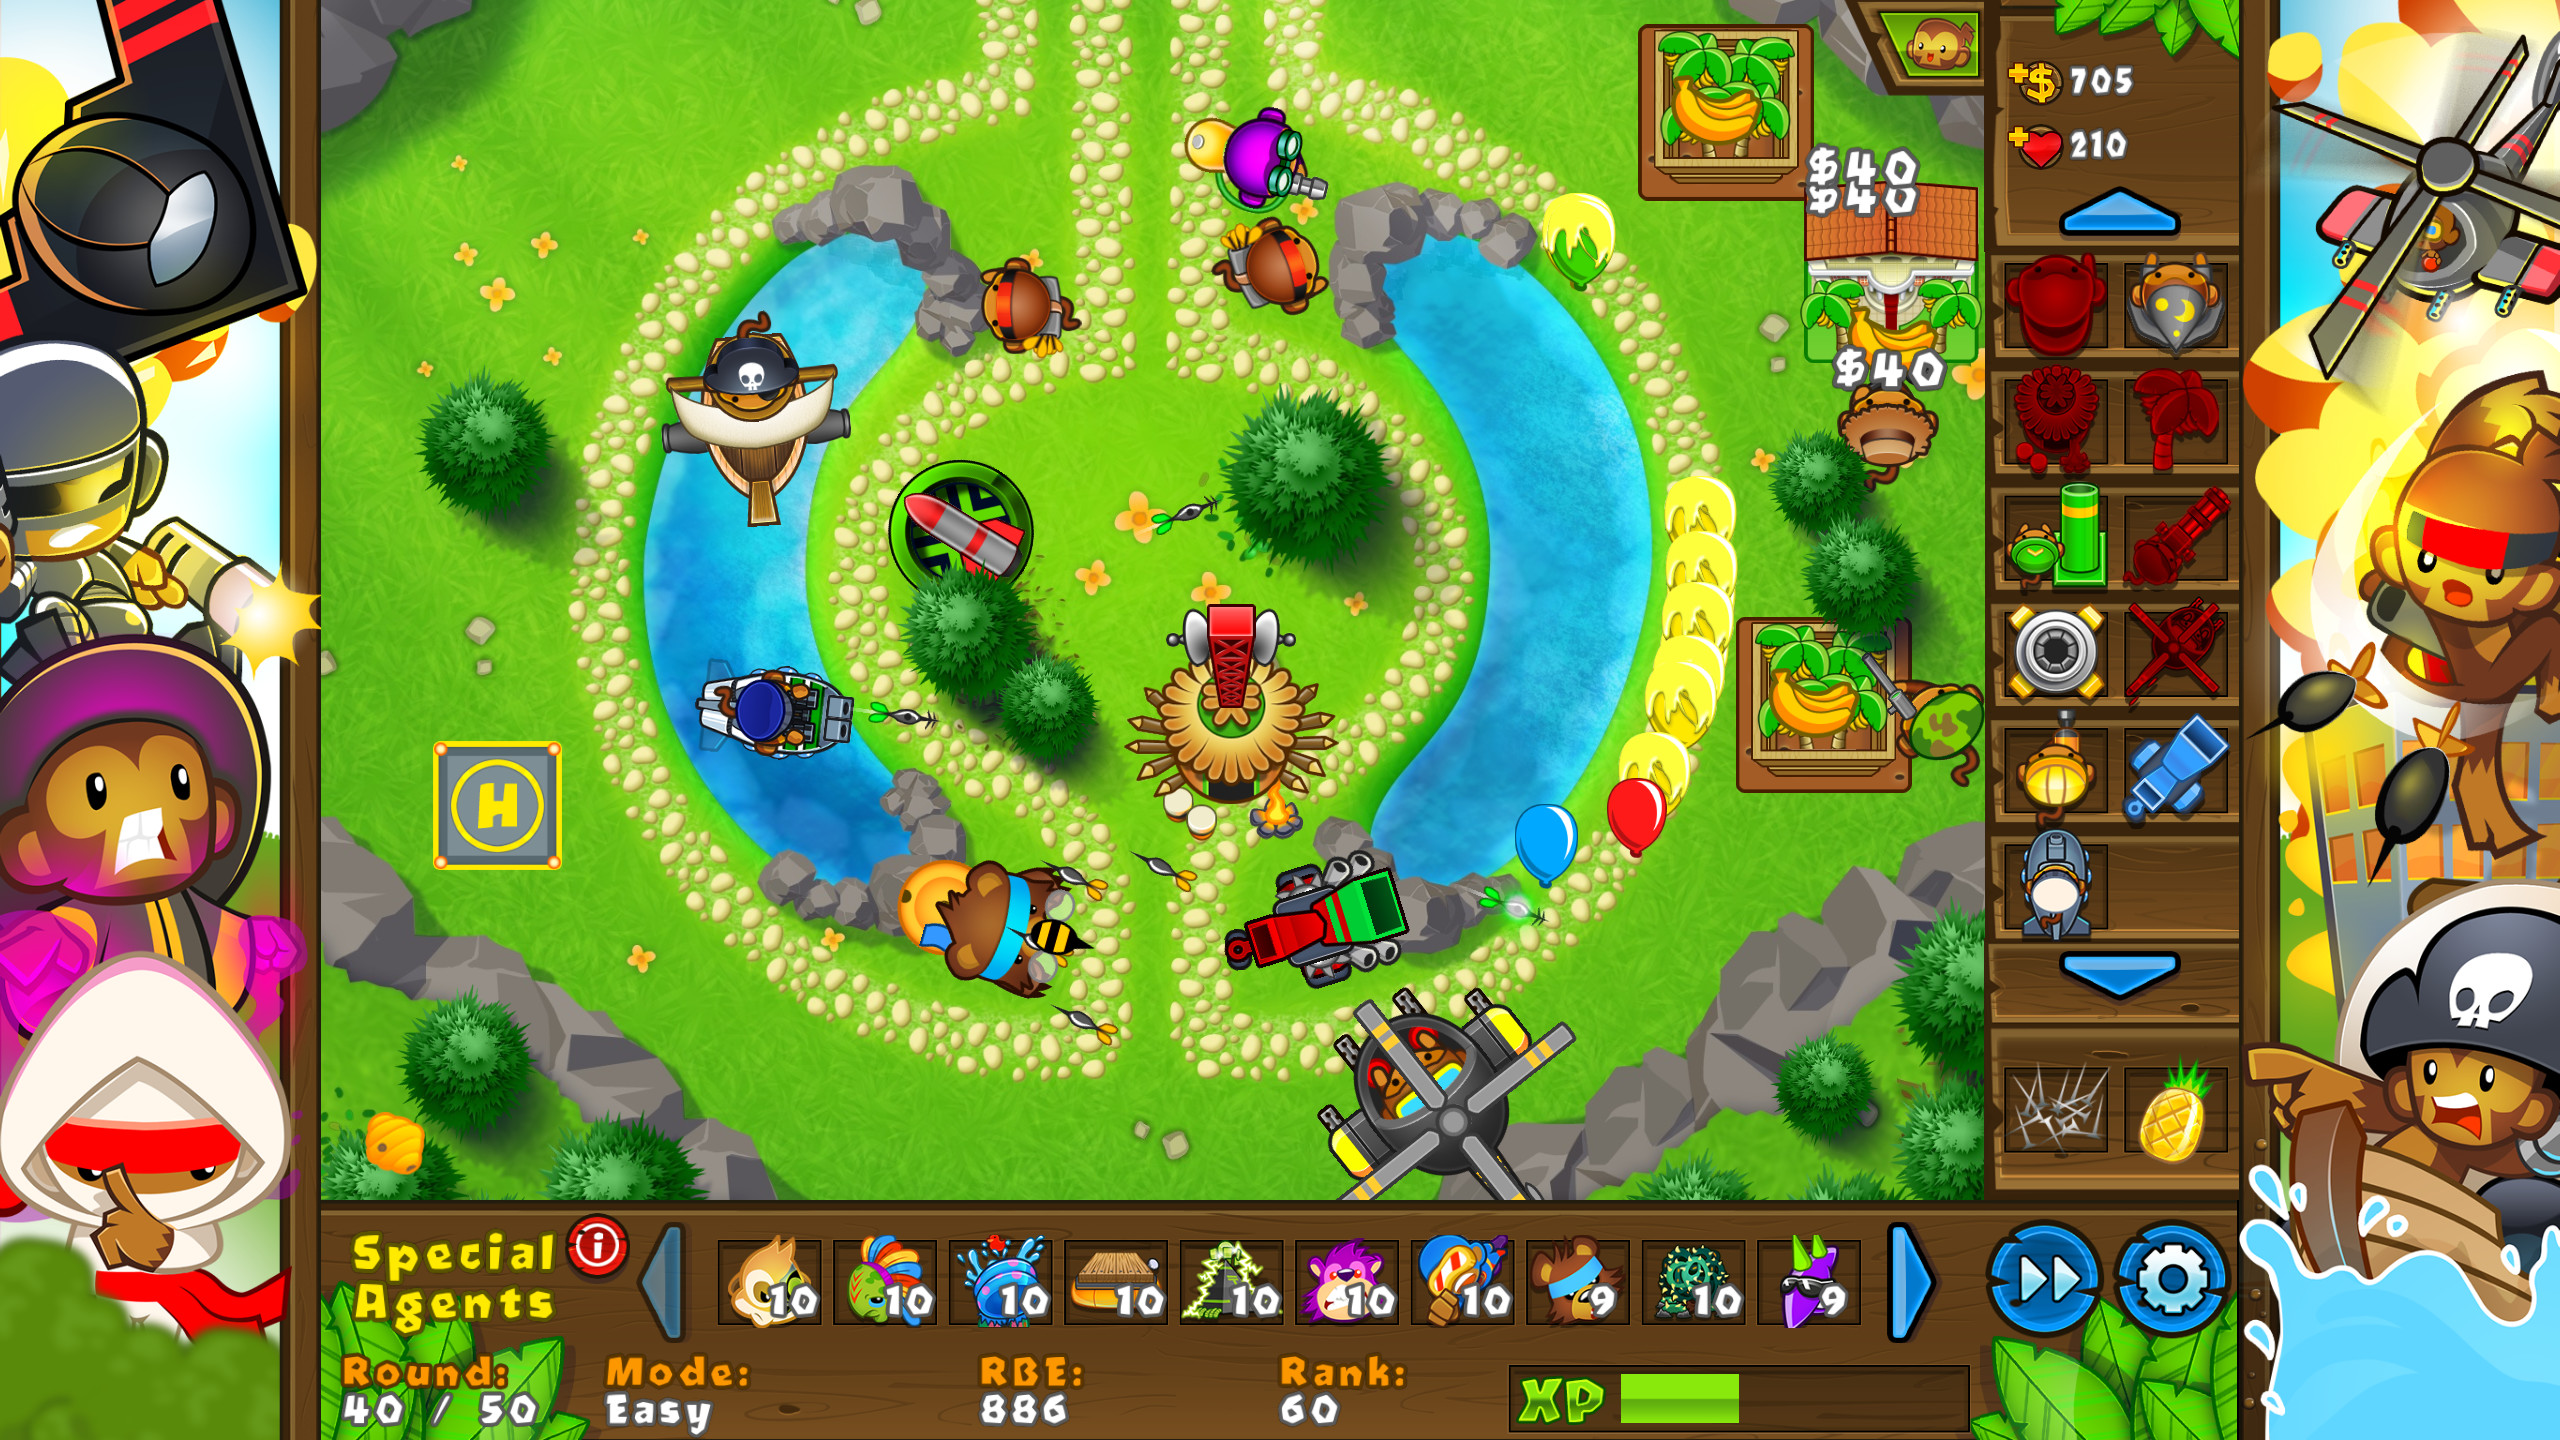 Bloons td 6 на пк. Игра Блунс ТД. Bloons td 5. Bloons Tower Defense 1. Тауэр-дефенс Bloons td 6.